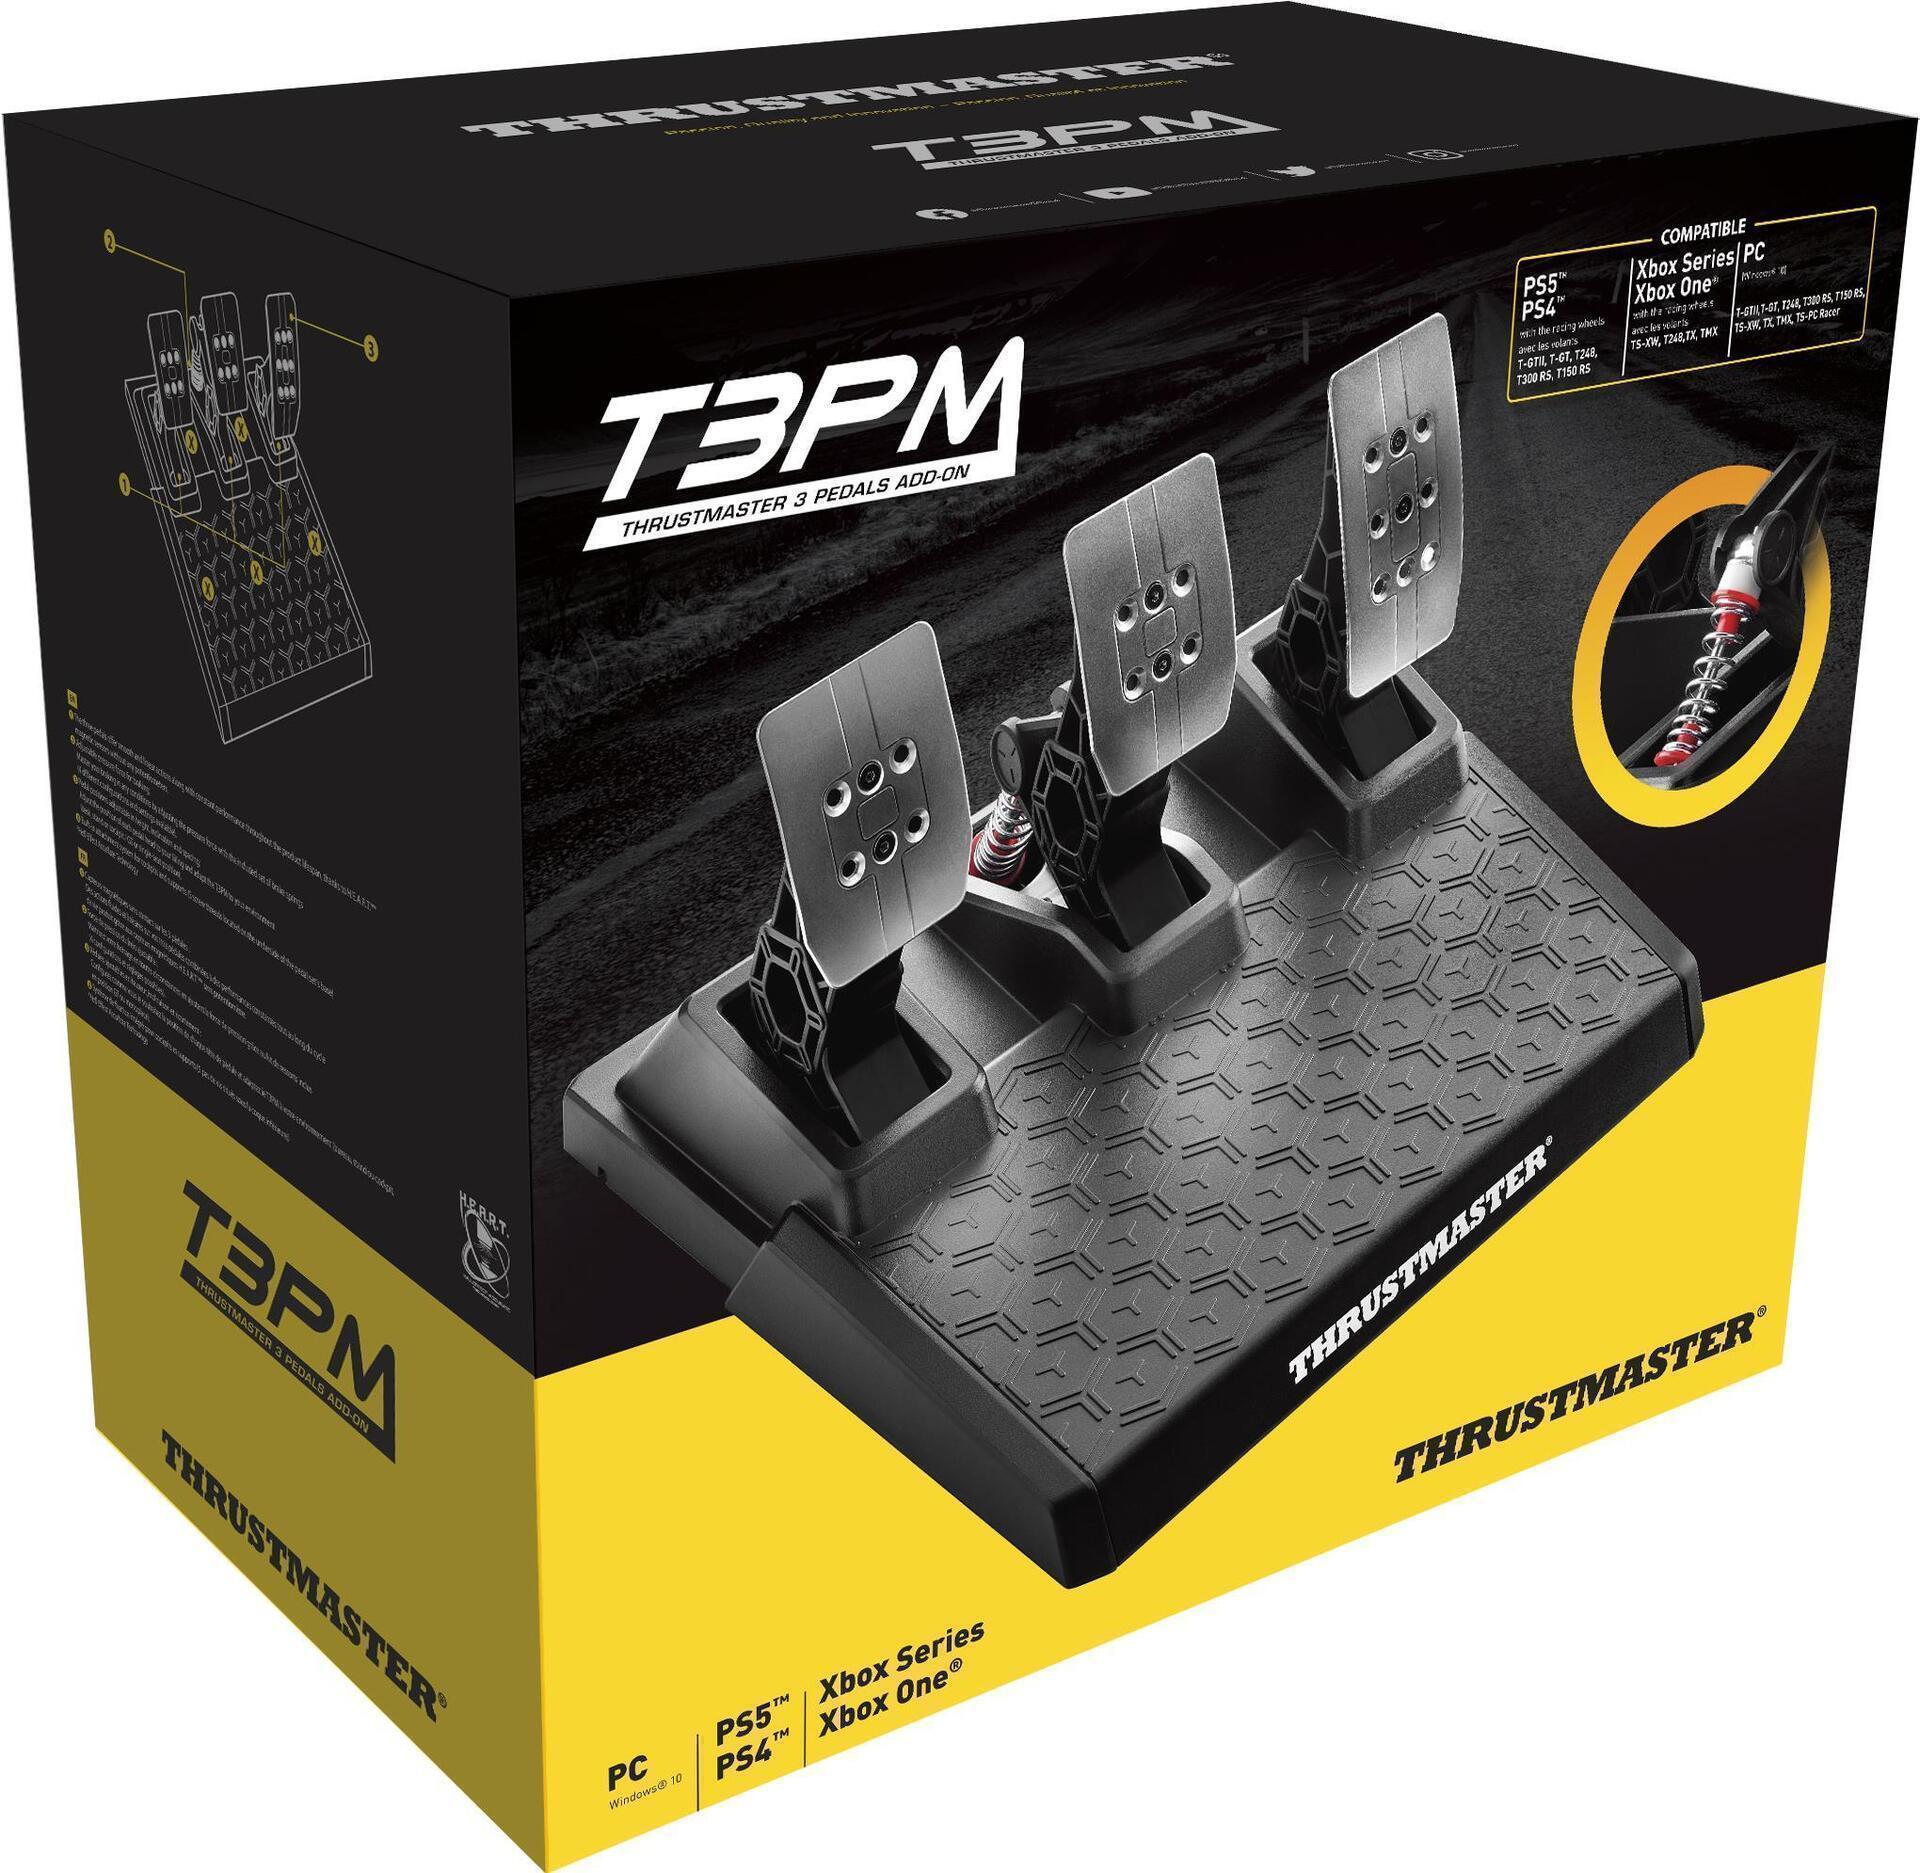 ThrustMaster T3PM Pedale (4060210)